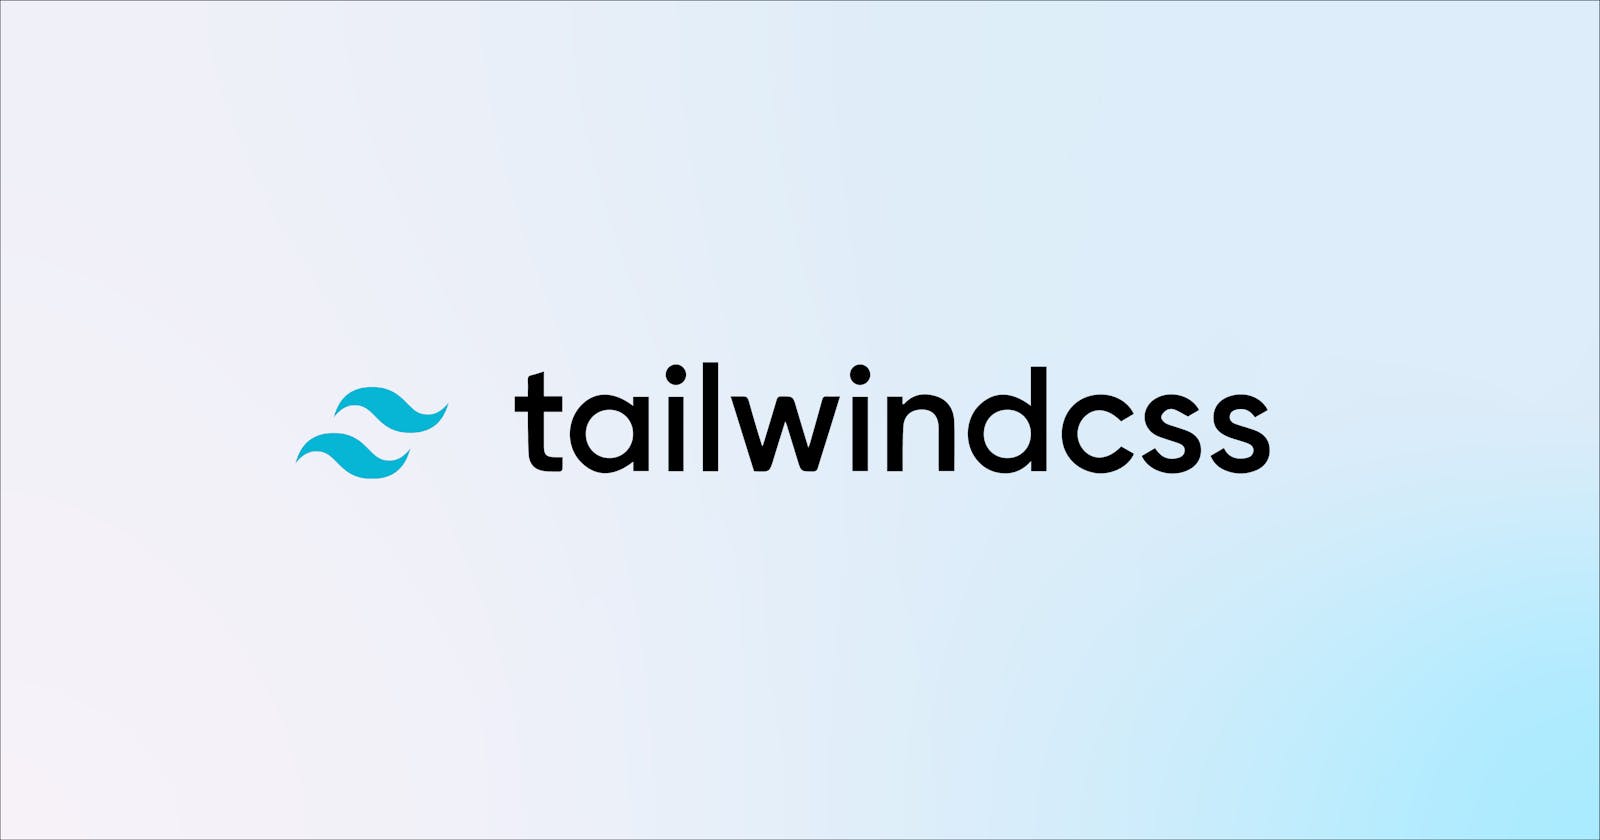 How to install Tailwind CSS in your HTML project